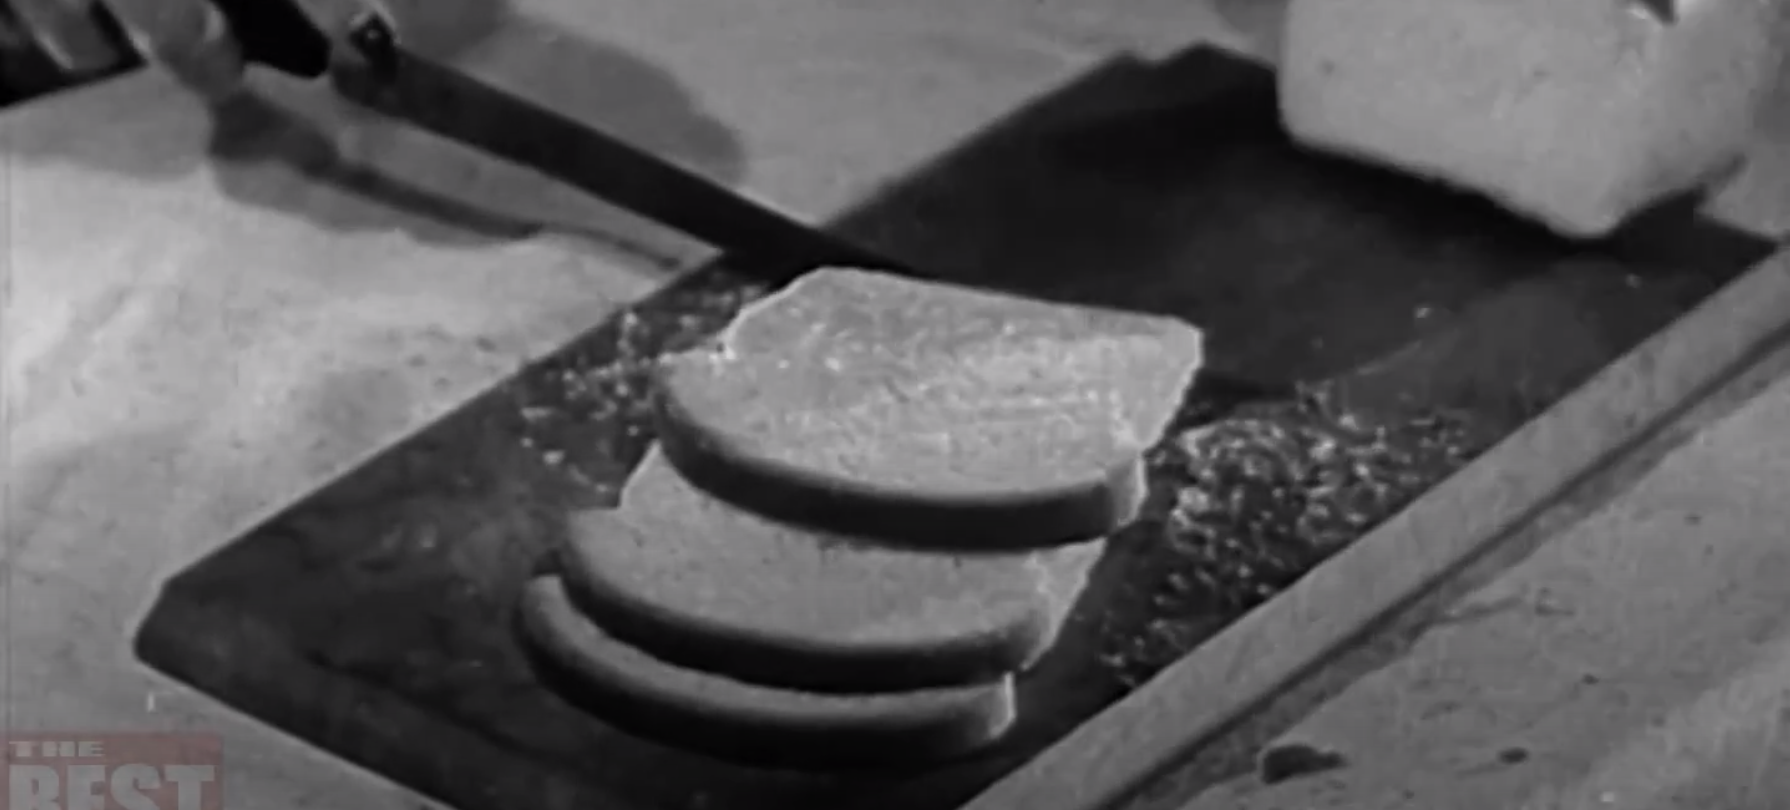 How Bread Was Made in the 1940s